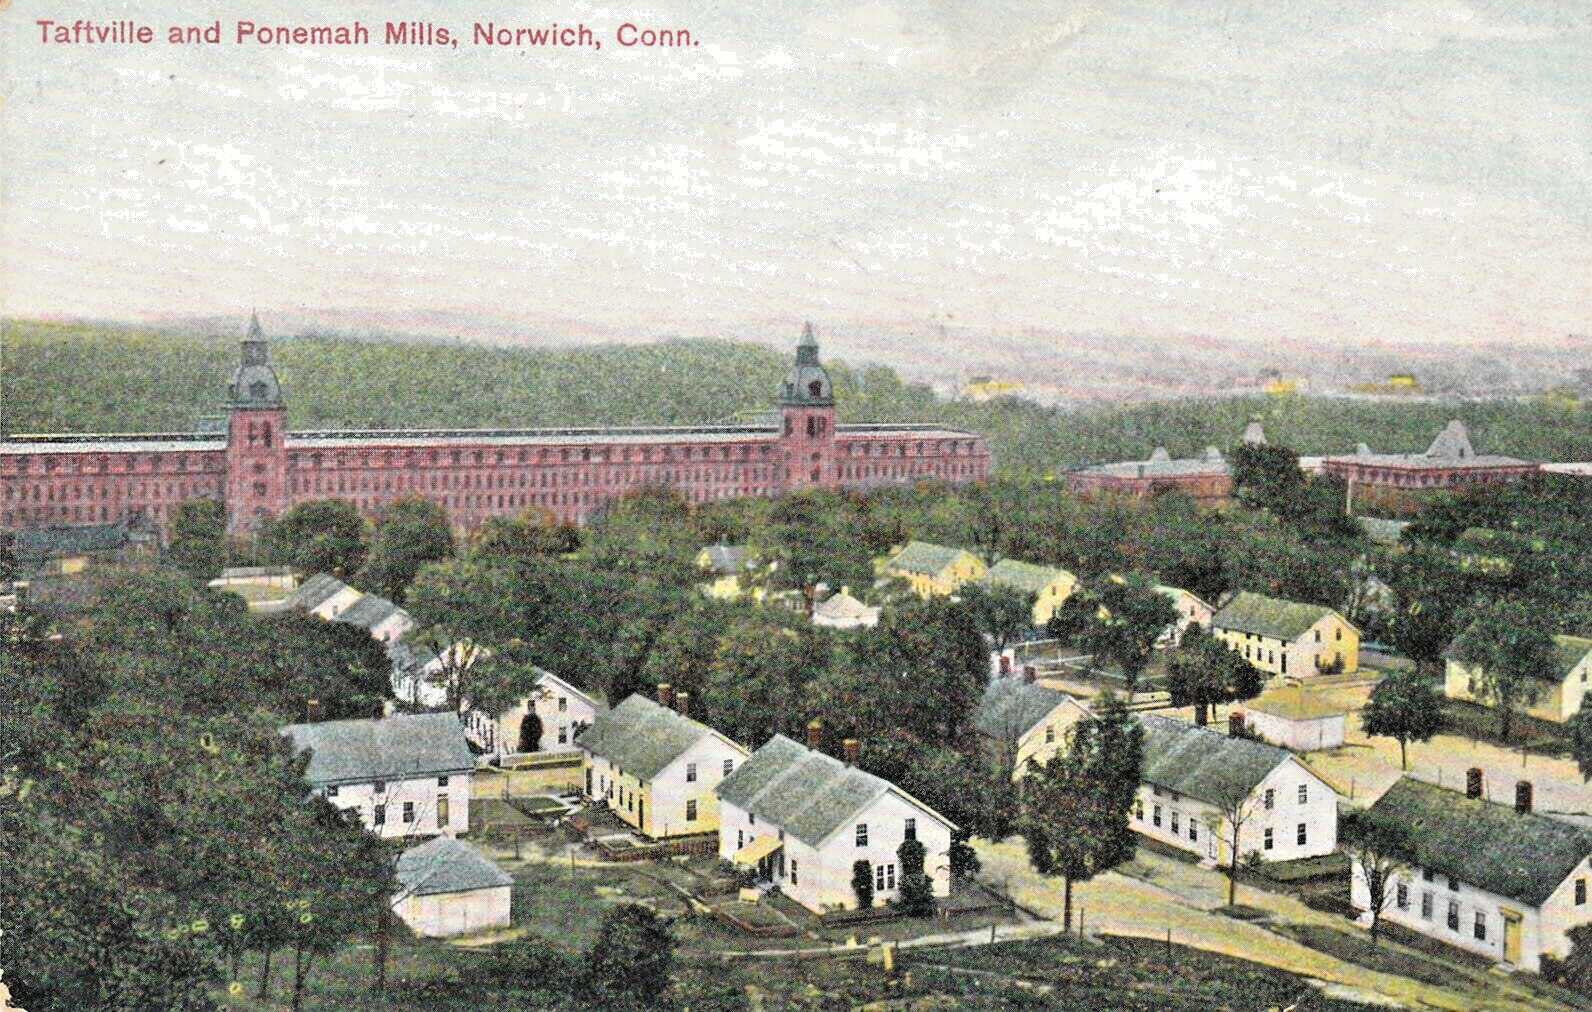 Norwich CT  Taftville c.1915 Ponemah Mill and employee Houses Aerial View Unused